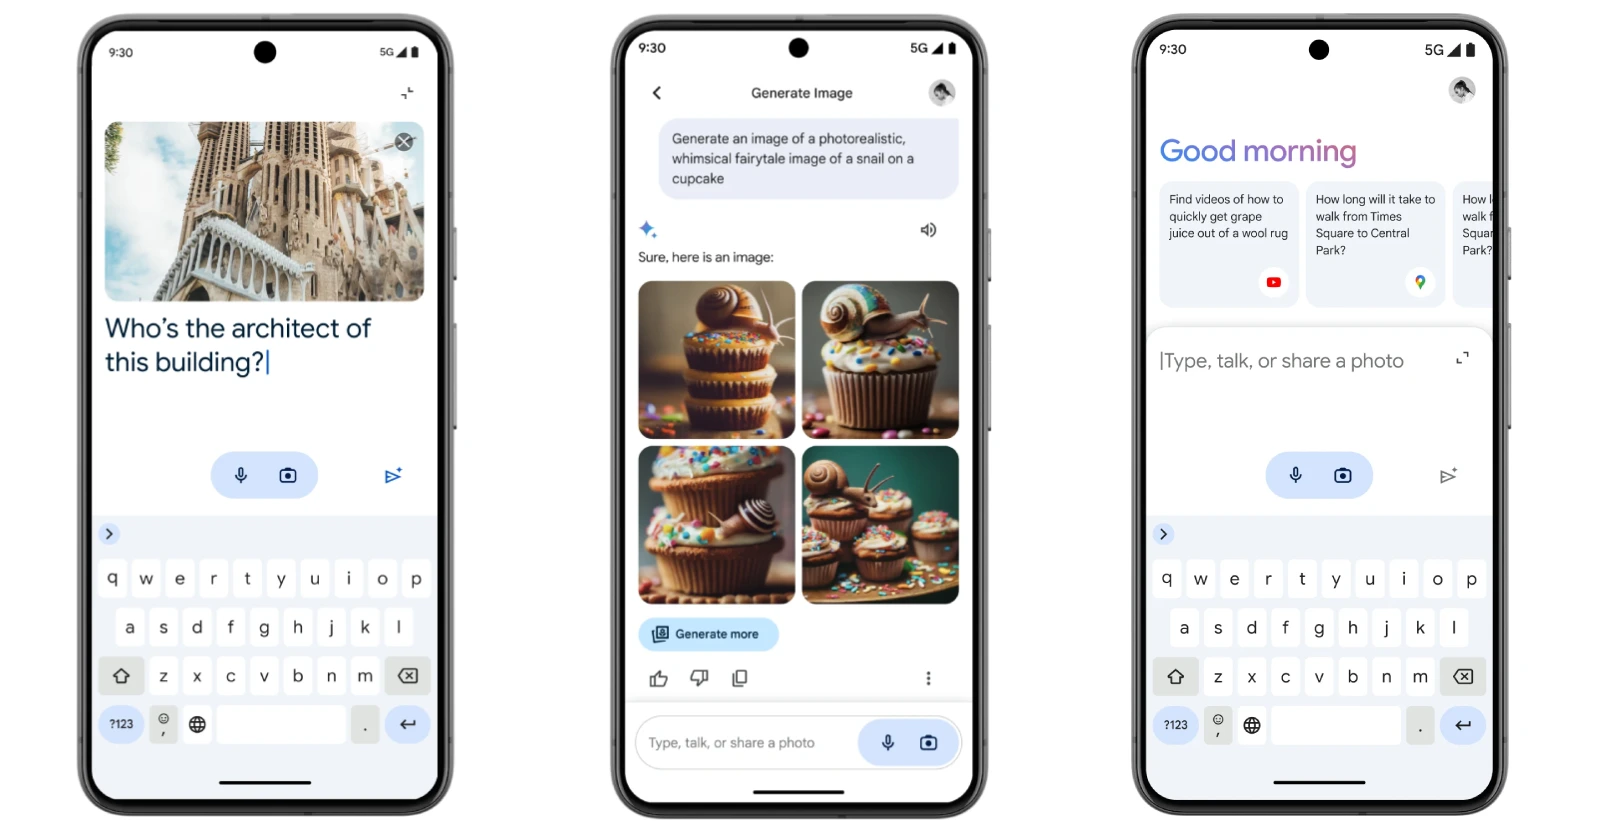 PSA: Gemini app doesn't support these Google Assistant features yet